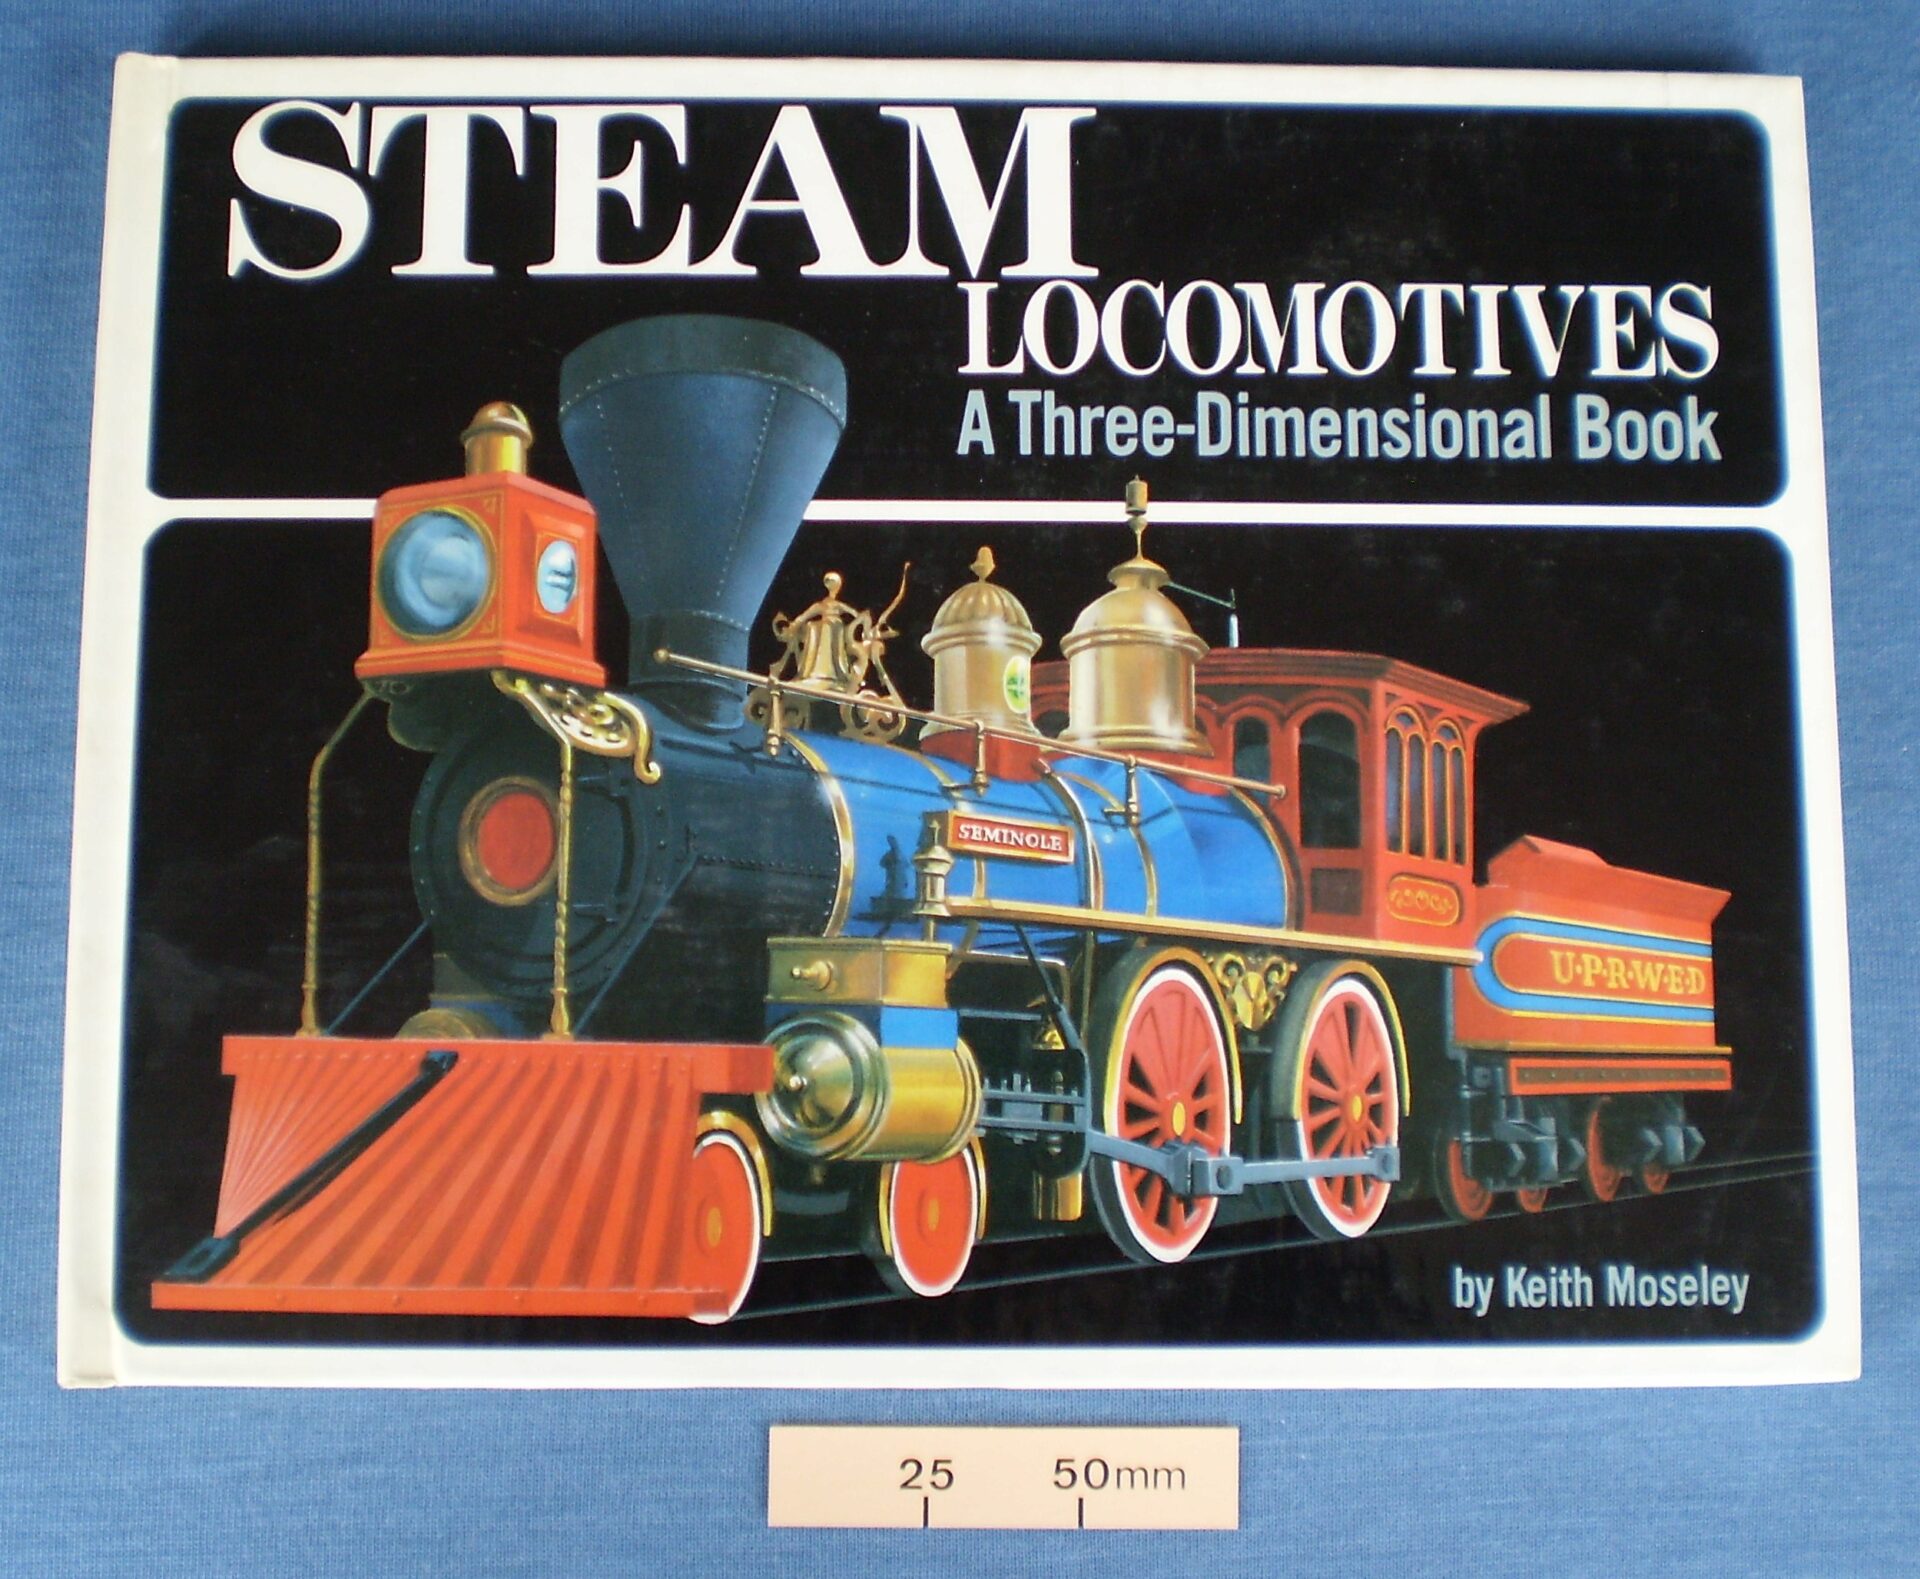 Pop-up book: ‘Steam Locomotives’ by Keith Moseley